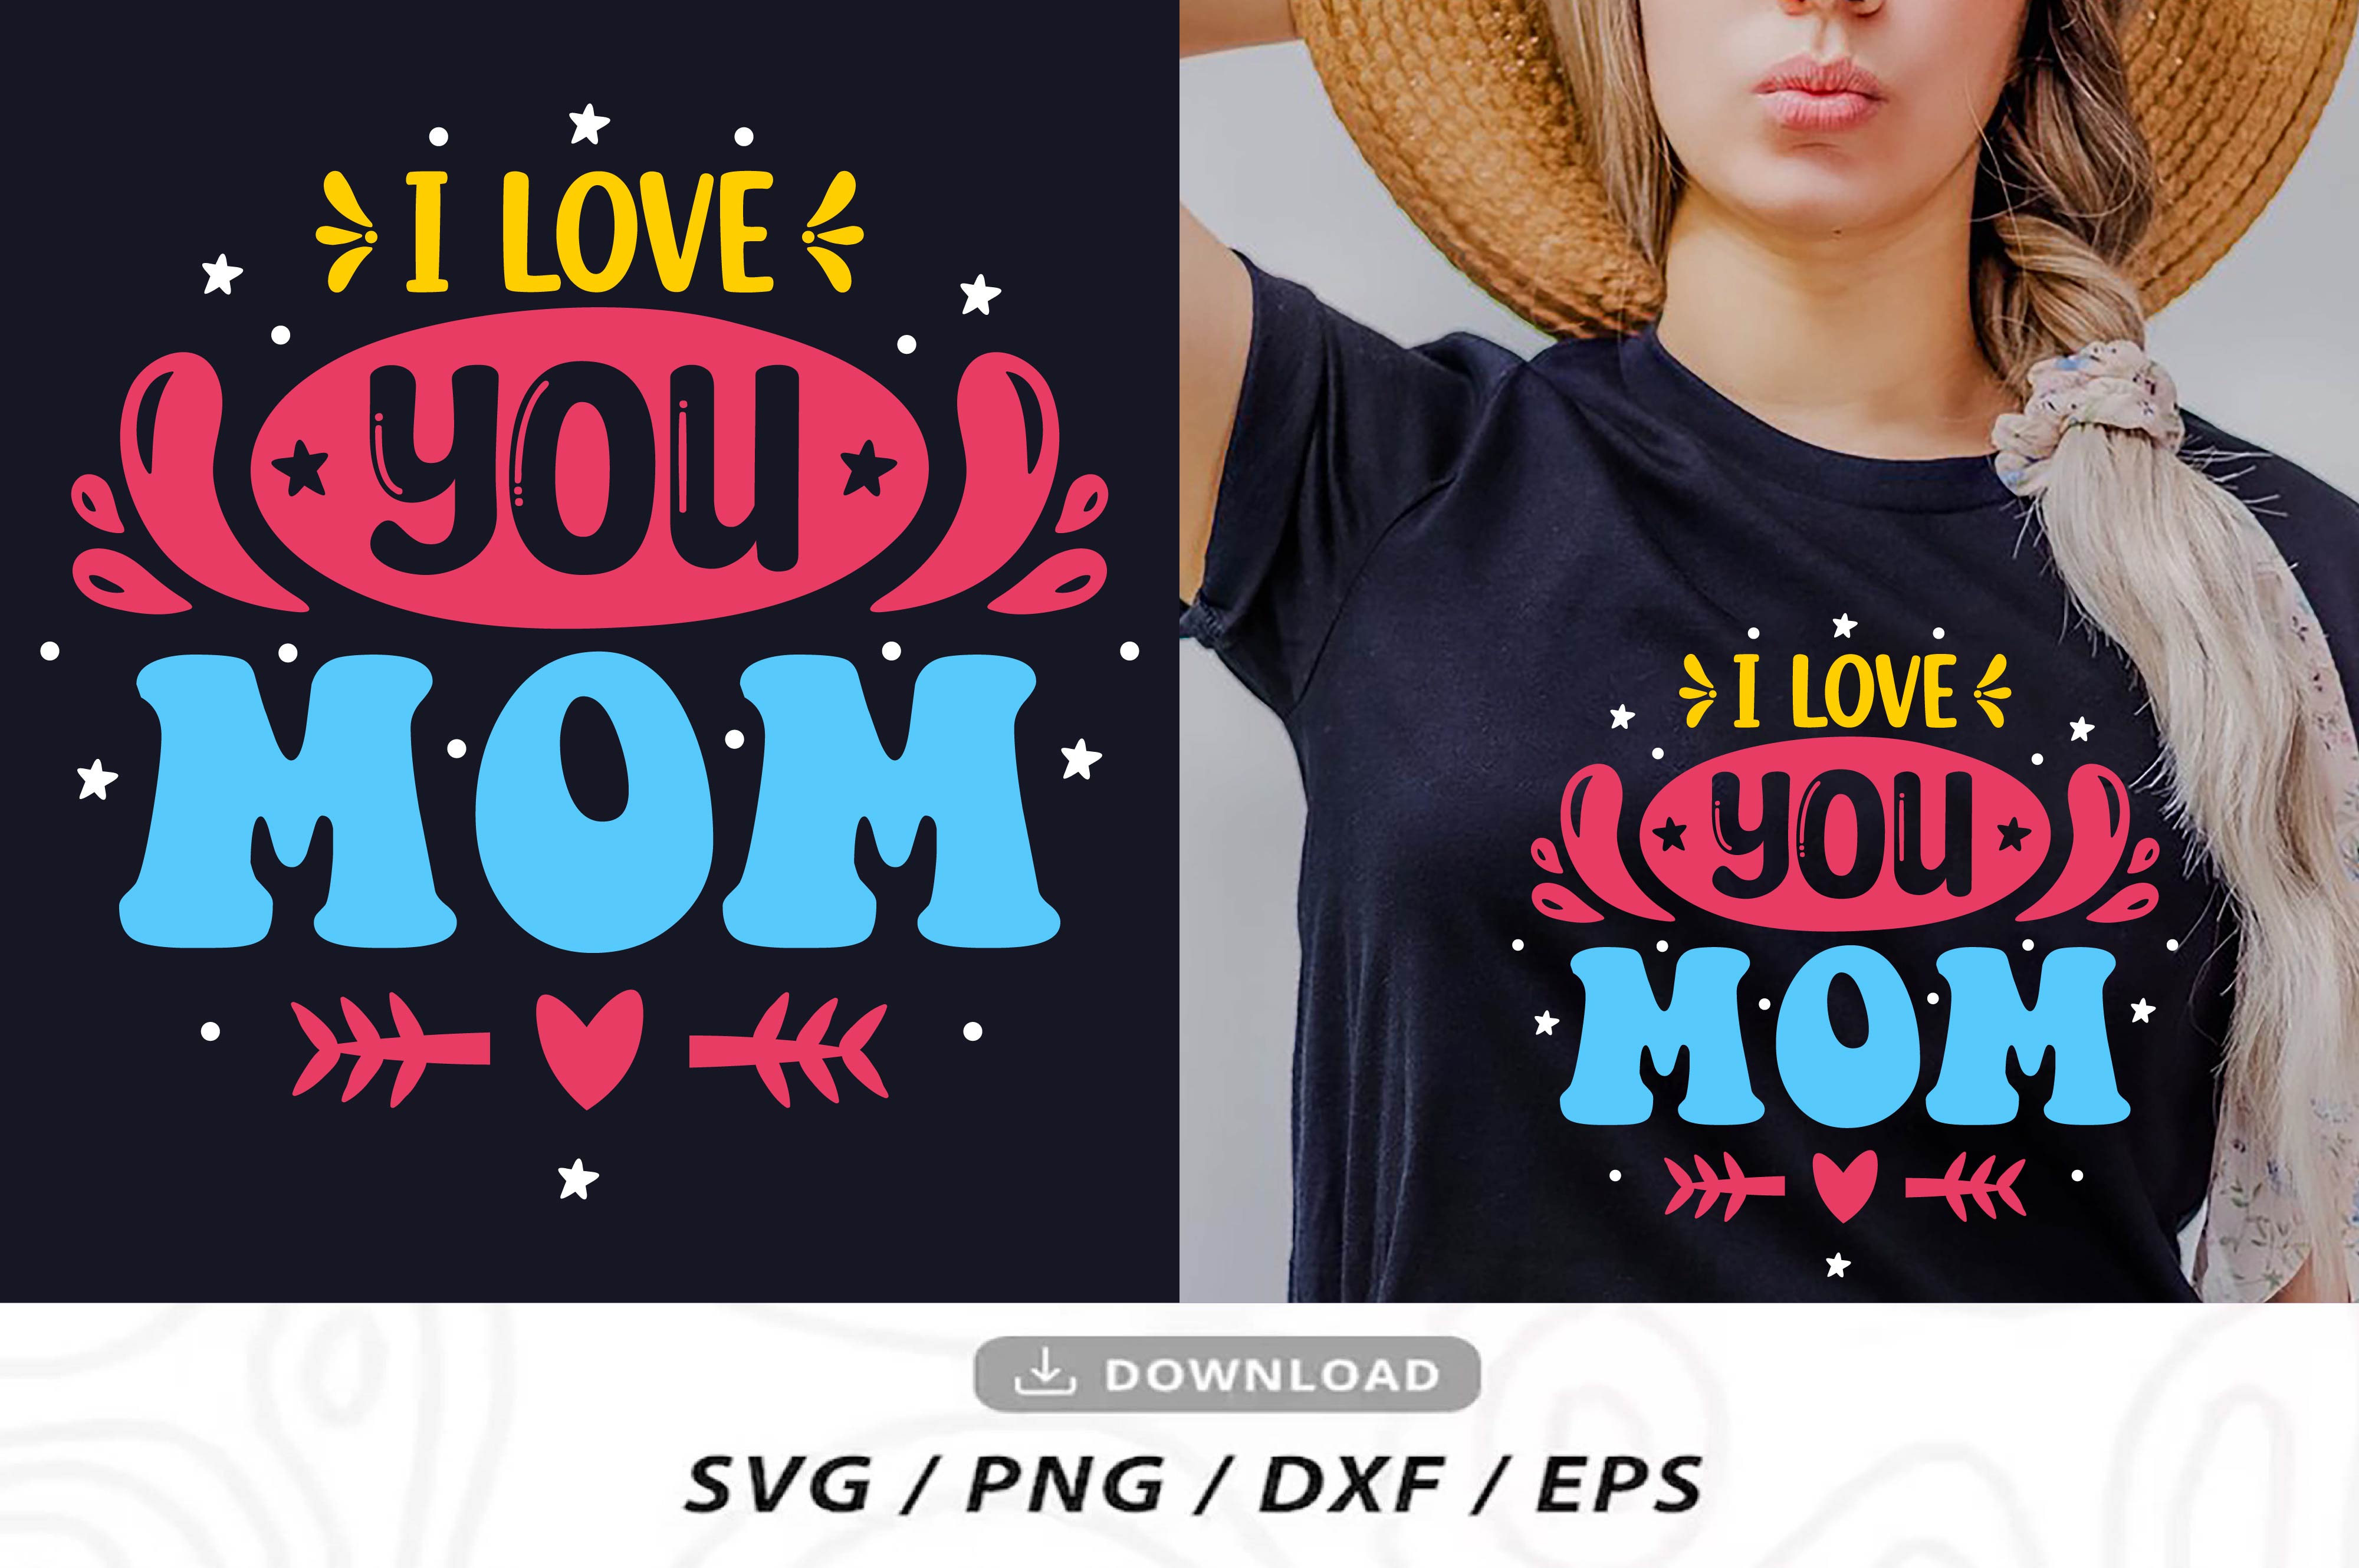 Woman wearing a t - shirt that says i love you mom.